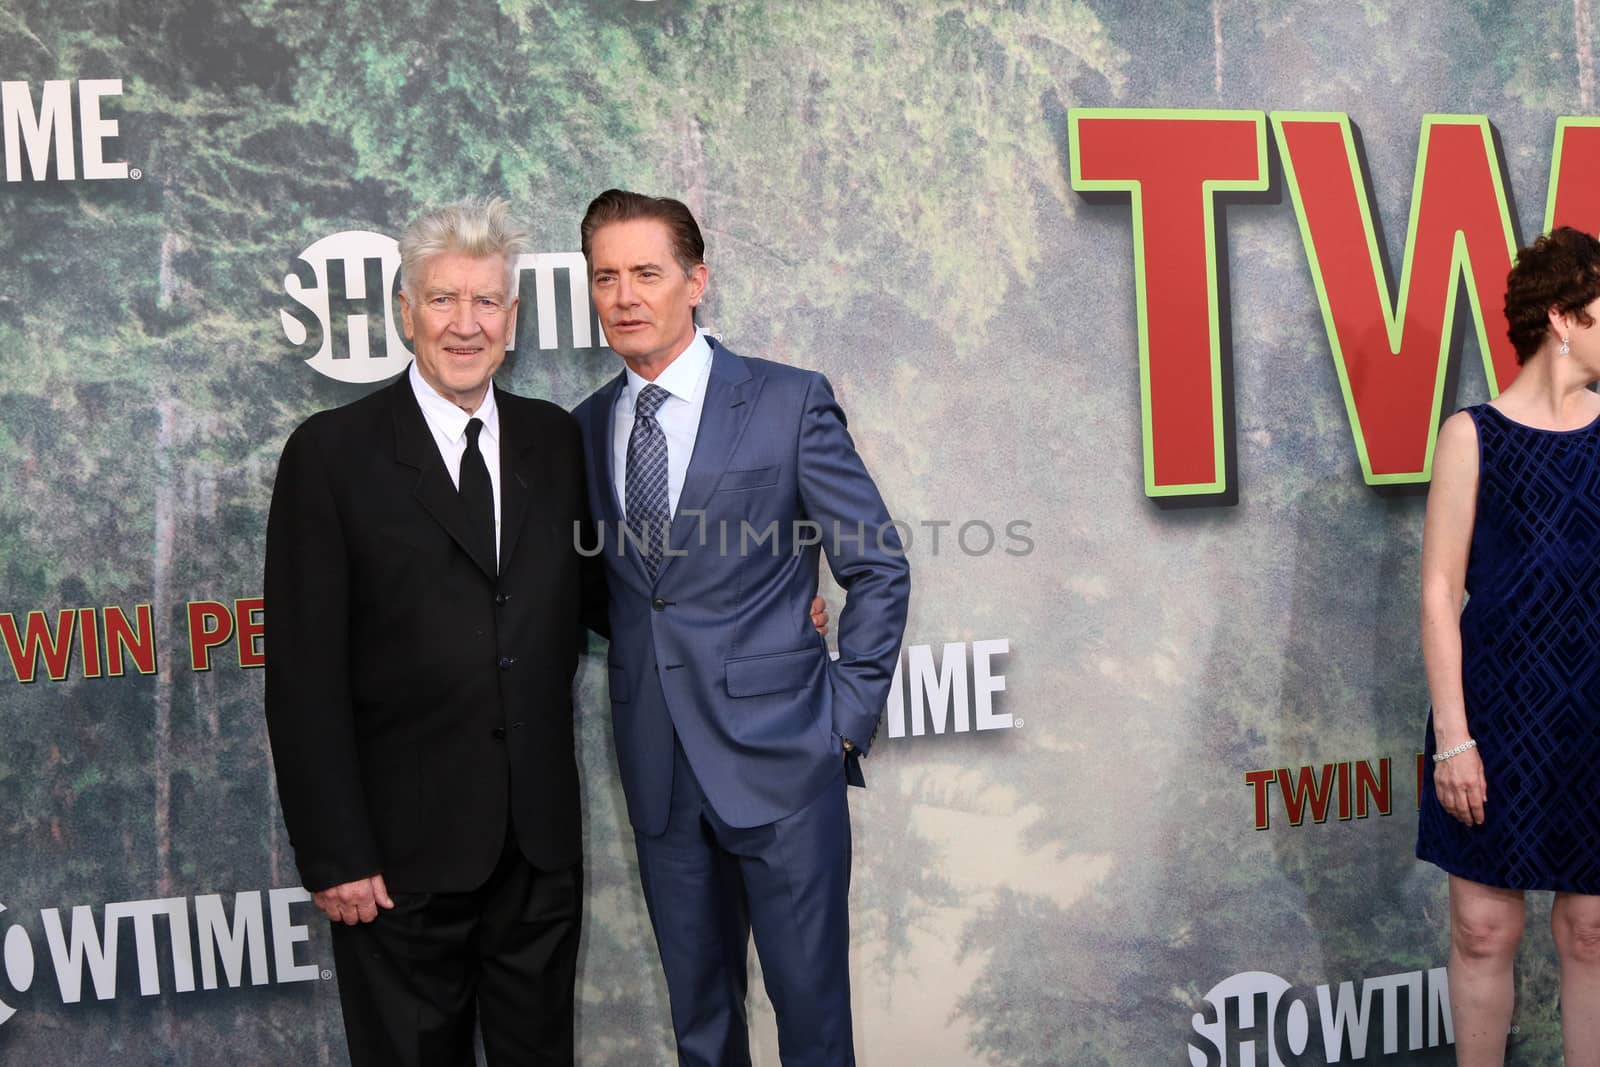 David Lynch, Kyle MacLachlan
at the "Twin Peaks" Premiere Screening, The Theater at Ace Hotel, Los Angeles, CA 05-19-17/ImageCollect by ImageCollect